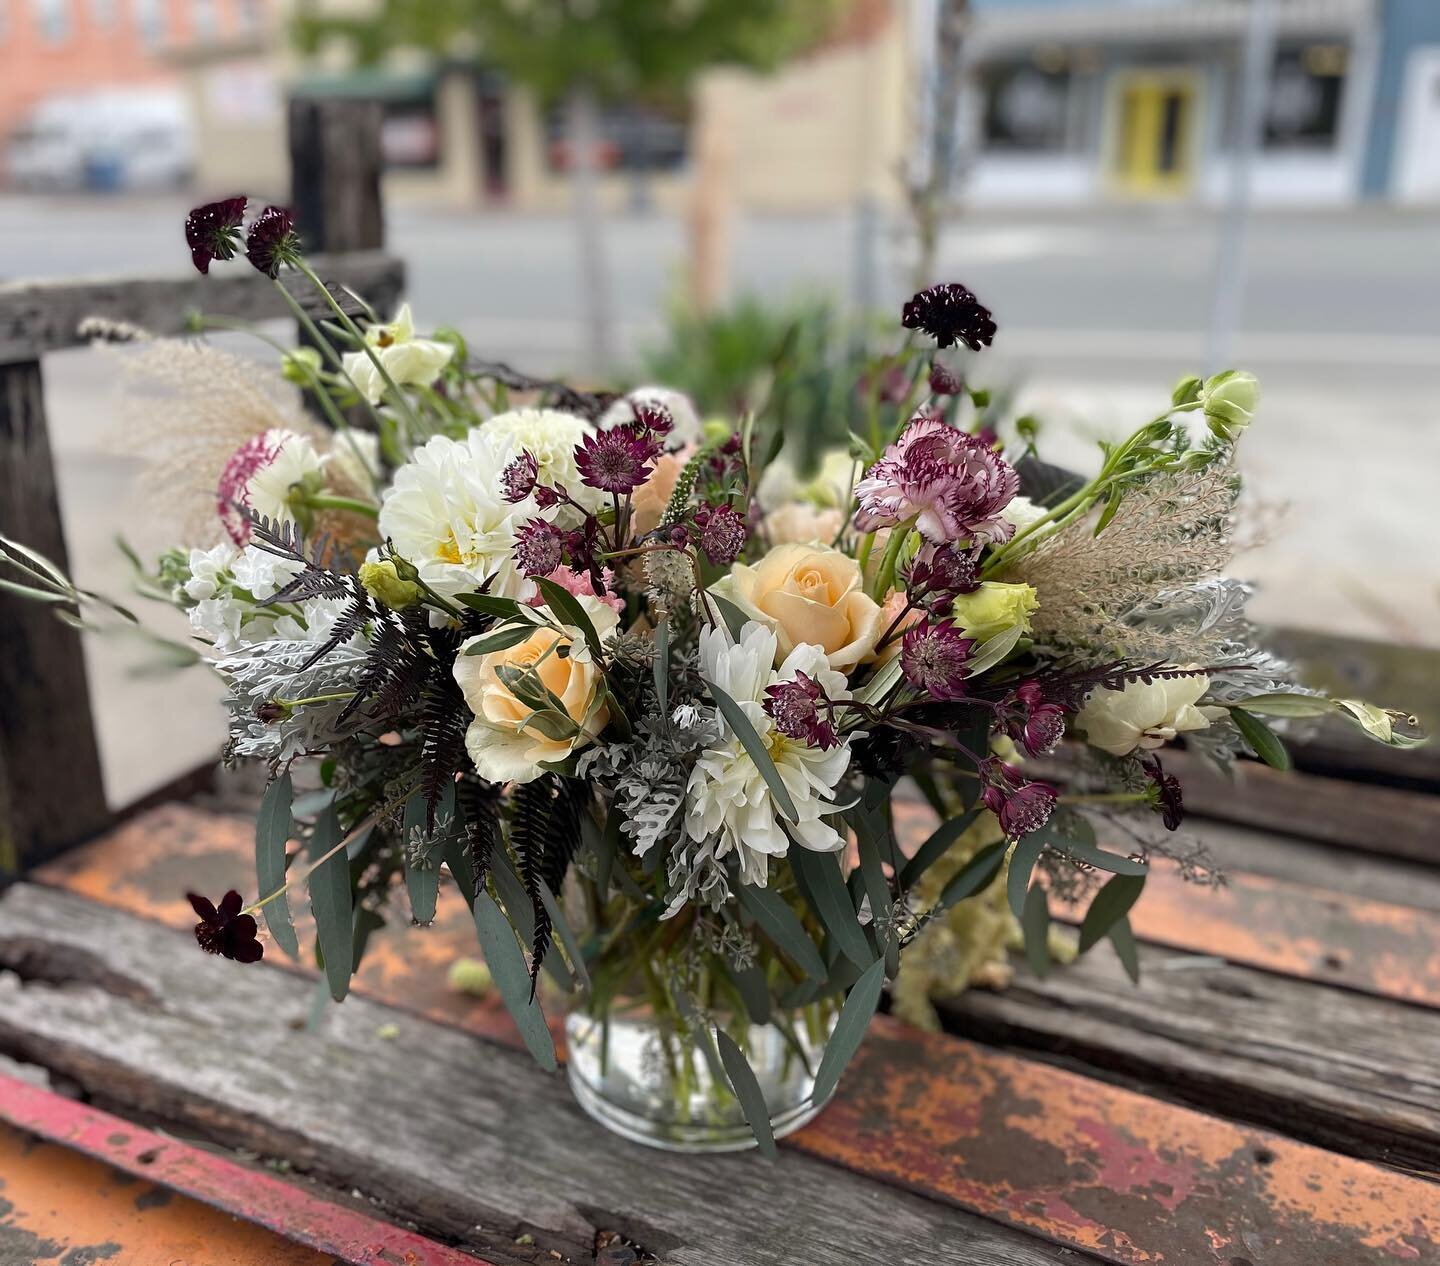 Hello Fall! 🍁🍂🍃 ringing in the new season with a gorgeous arrangement of seasonal blooms and grasses that&rsquo;s bound to give the fall feels to everyone! Let our designers dazzle you with floral magic, call or order online today! #vandafloraldes